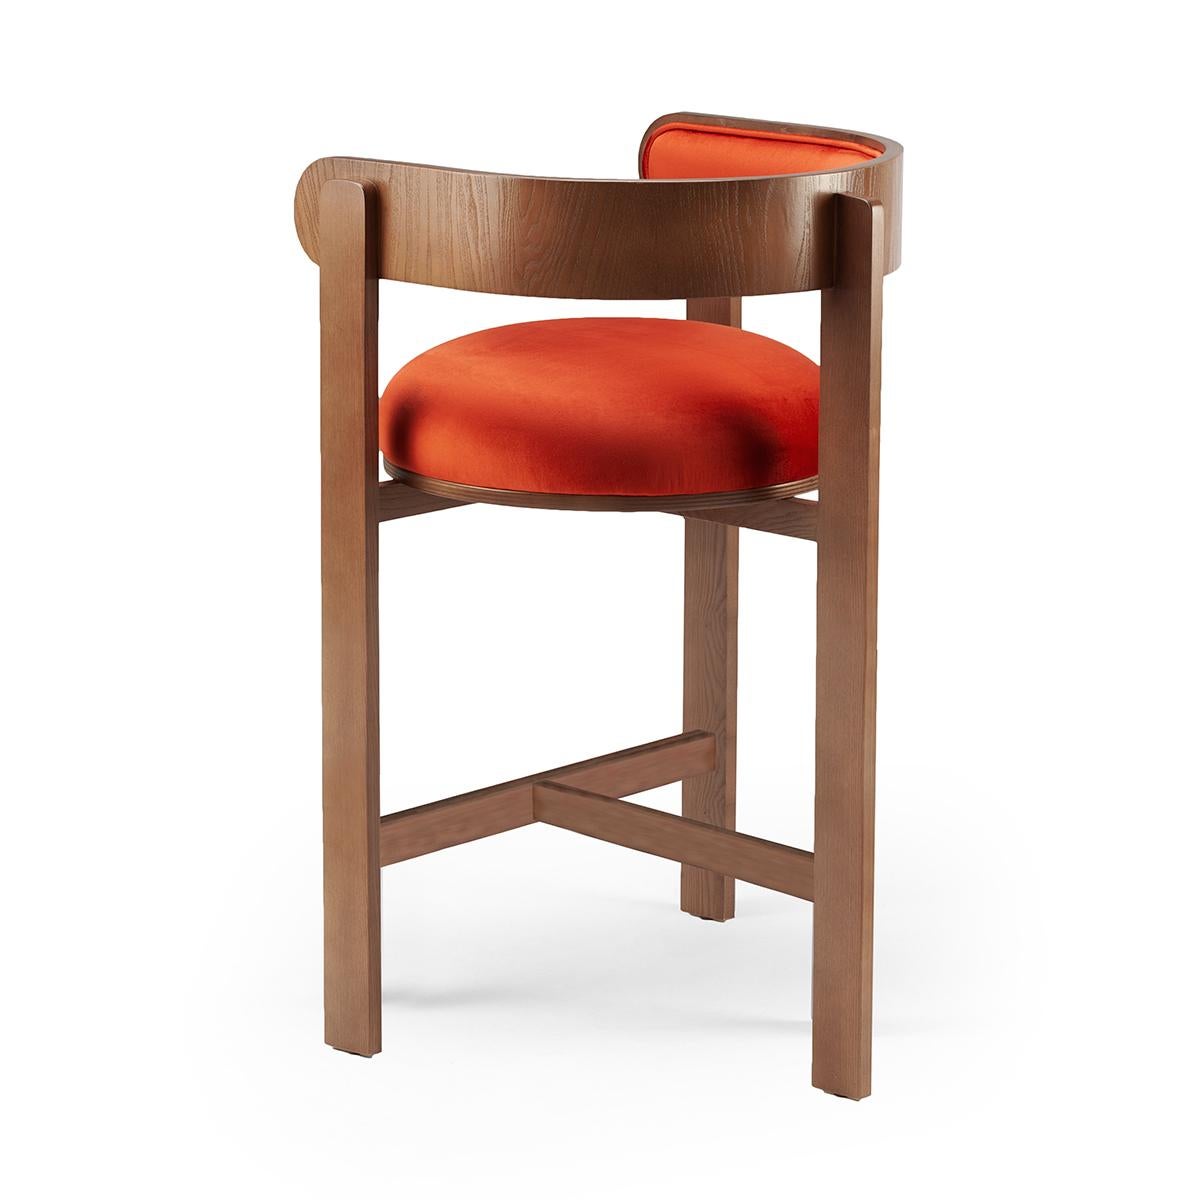 The clean and sensual lines of the Moulin chair make this piece a comfortable and exuberant one, adorned with piping and a bent wood structure which frames a perfectly round seat. Moulin chair invites guests with its fun and flirtatious feel,